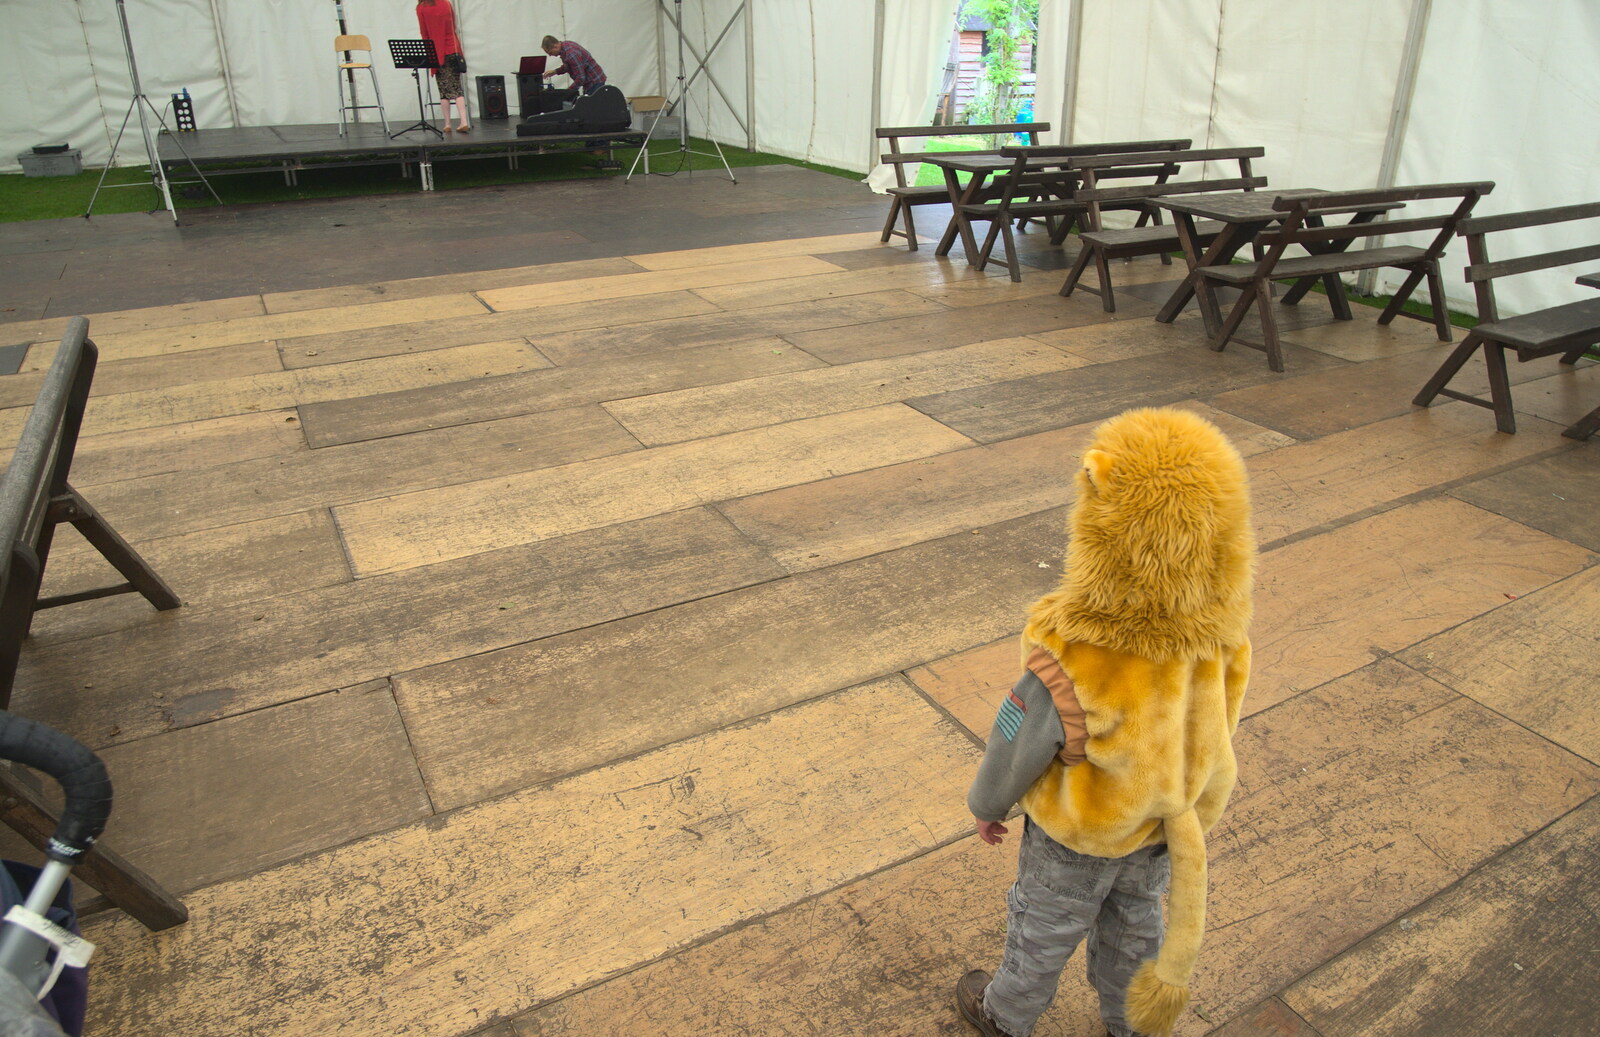 Fred surveys the stage in his lion costume from The Low House Beer Festival, Laxfield, Suffolk - 15th September 2013